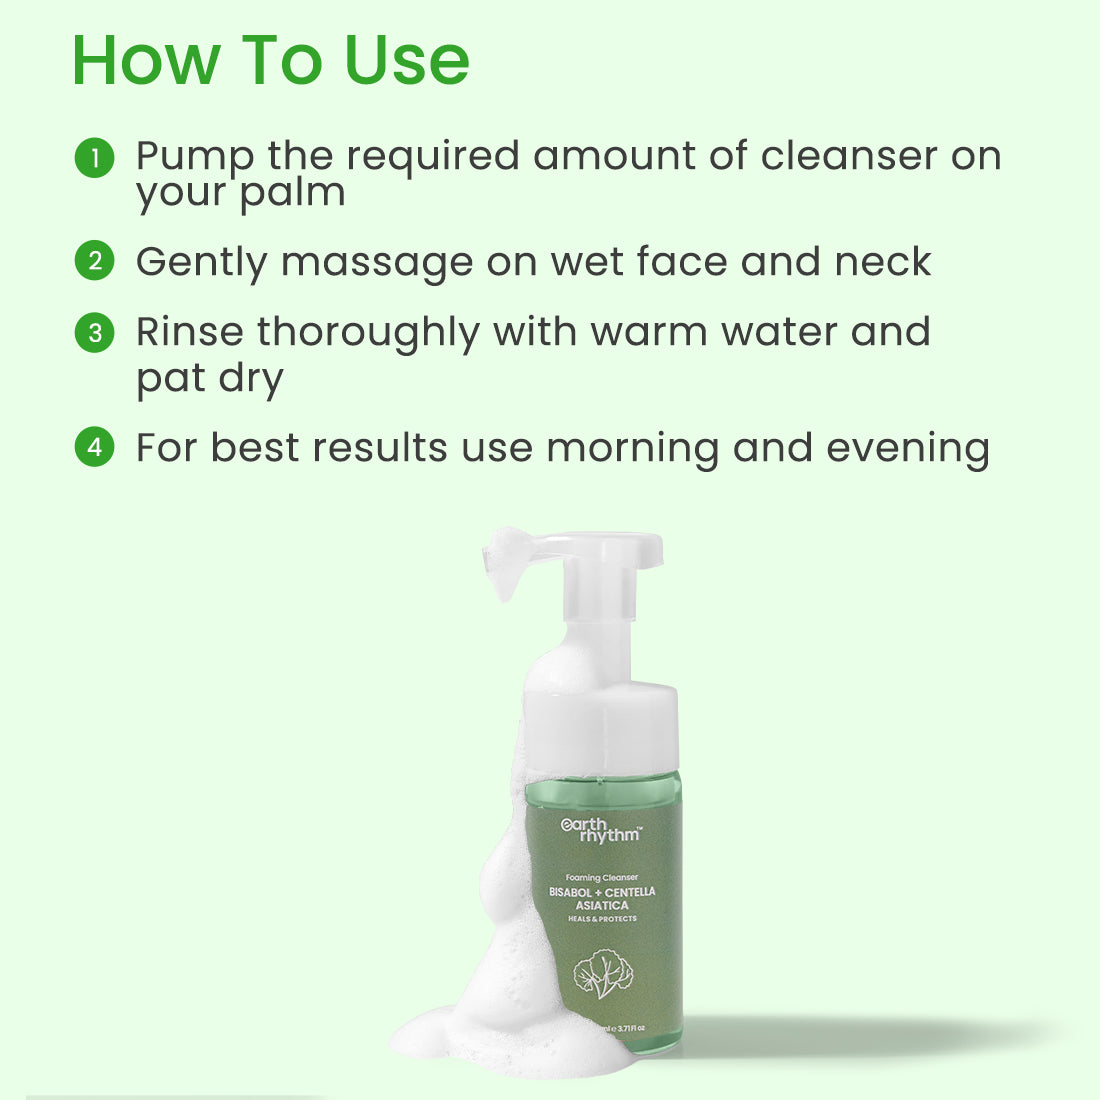 How to use Bisabolol Cica Foaming Cleanser